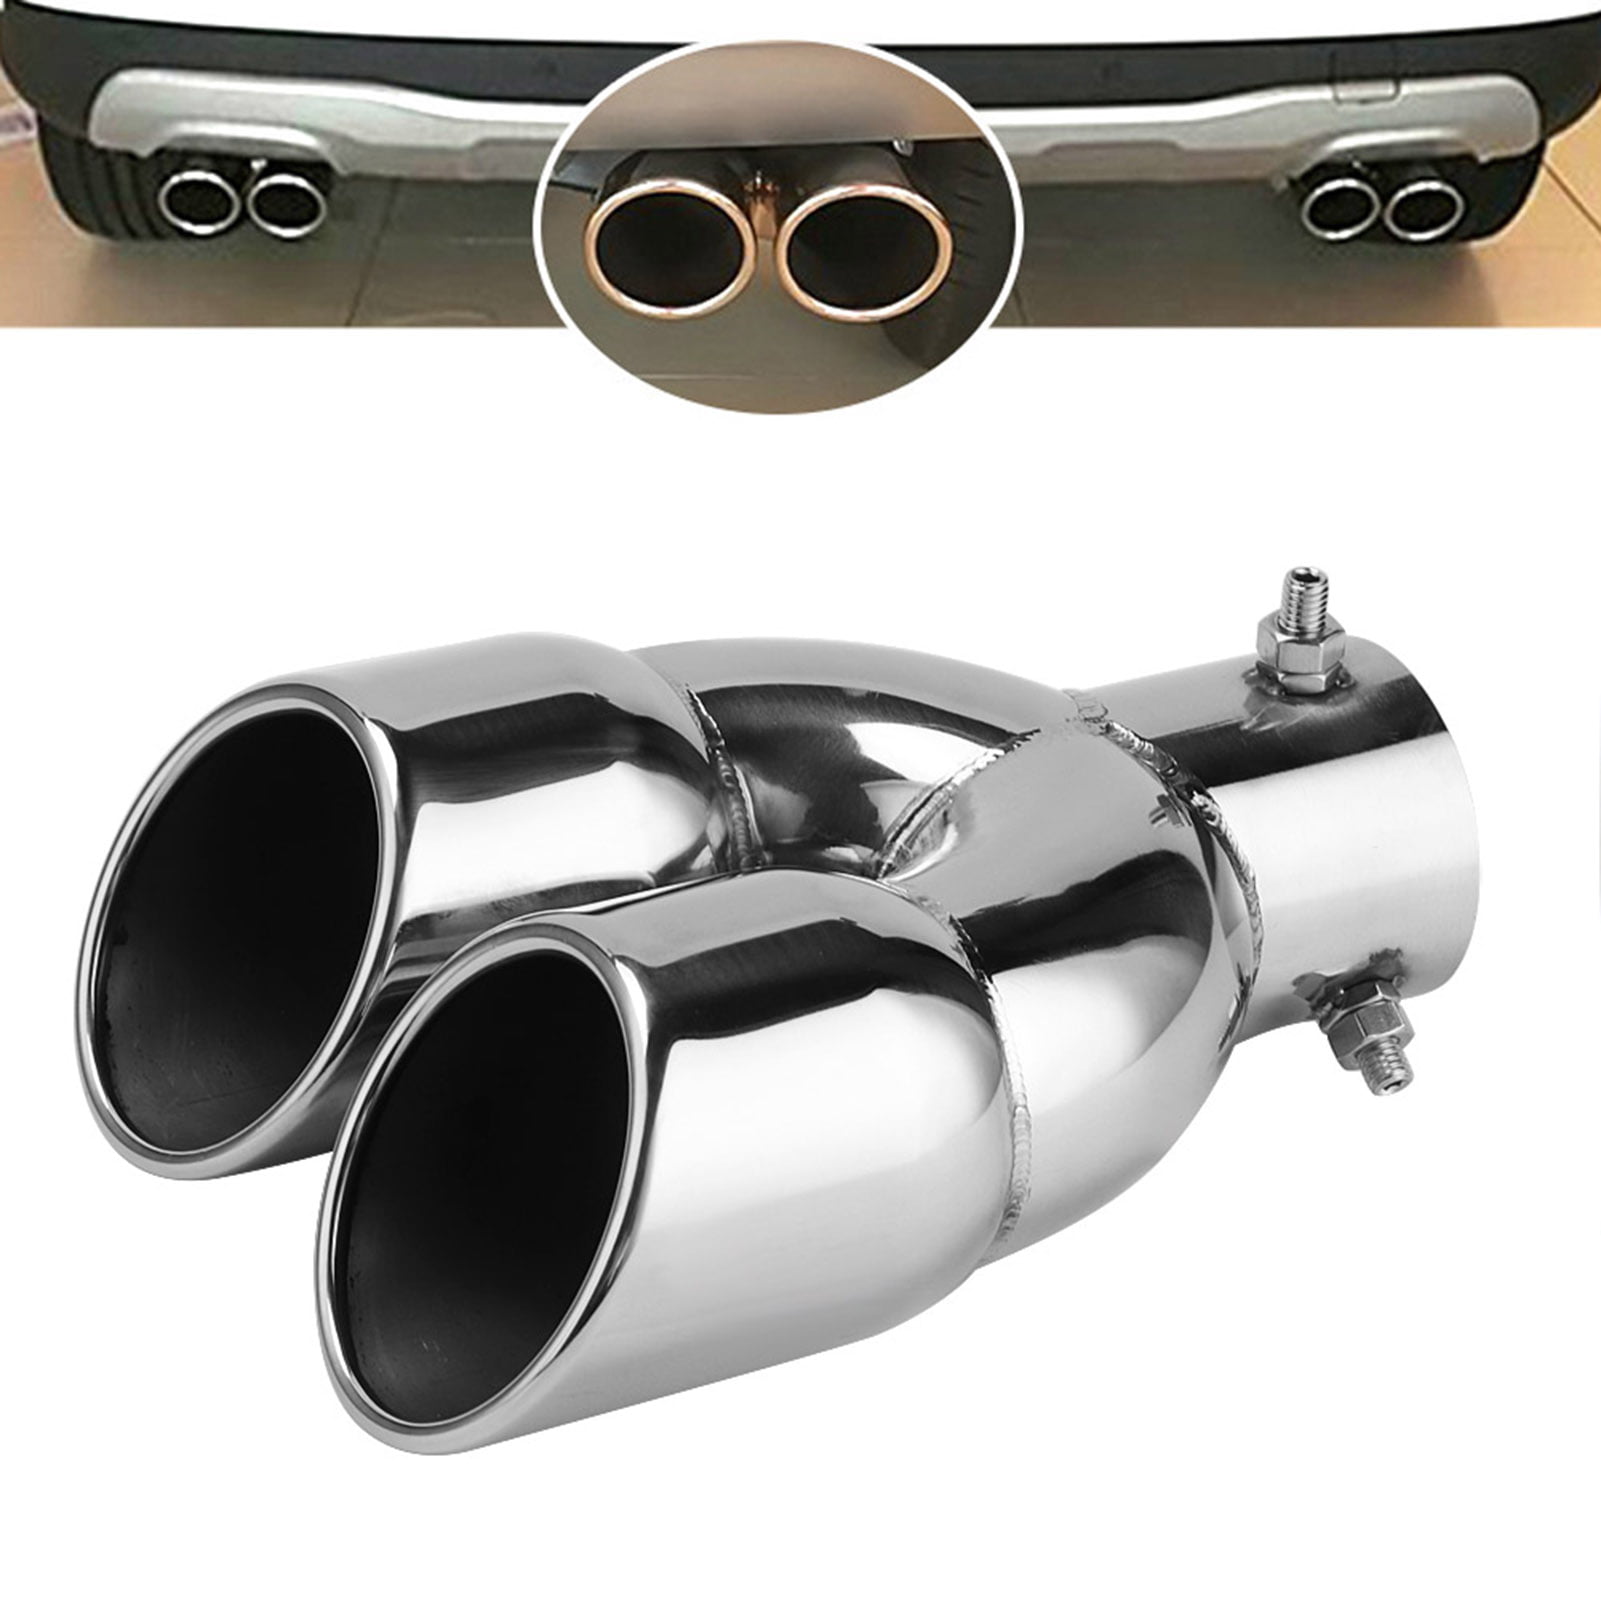 Rockyin Car Dual Exhaust Tail Pipes Stainless Steel Muffler Tips 63-76-220 